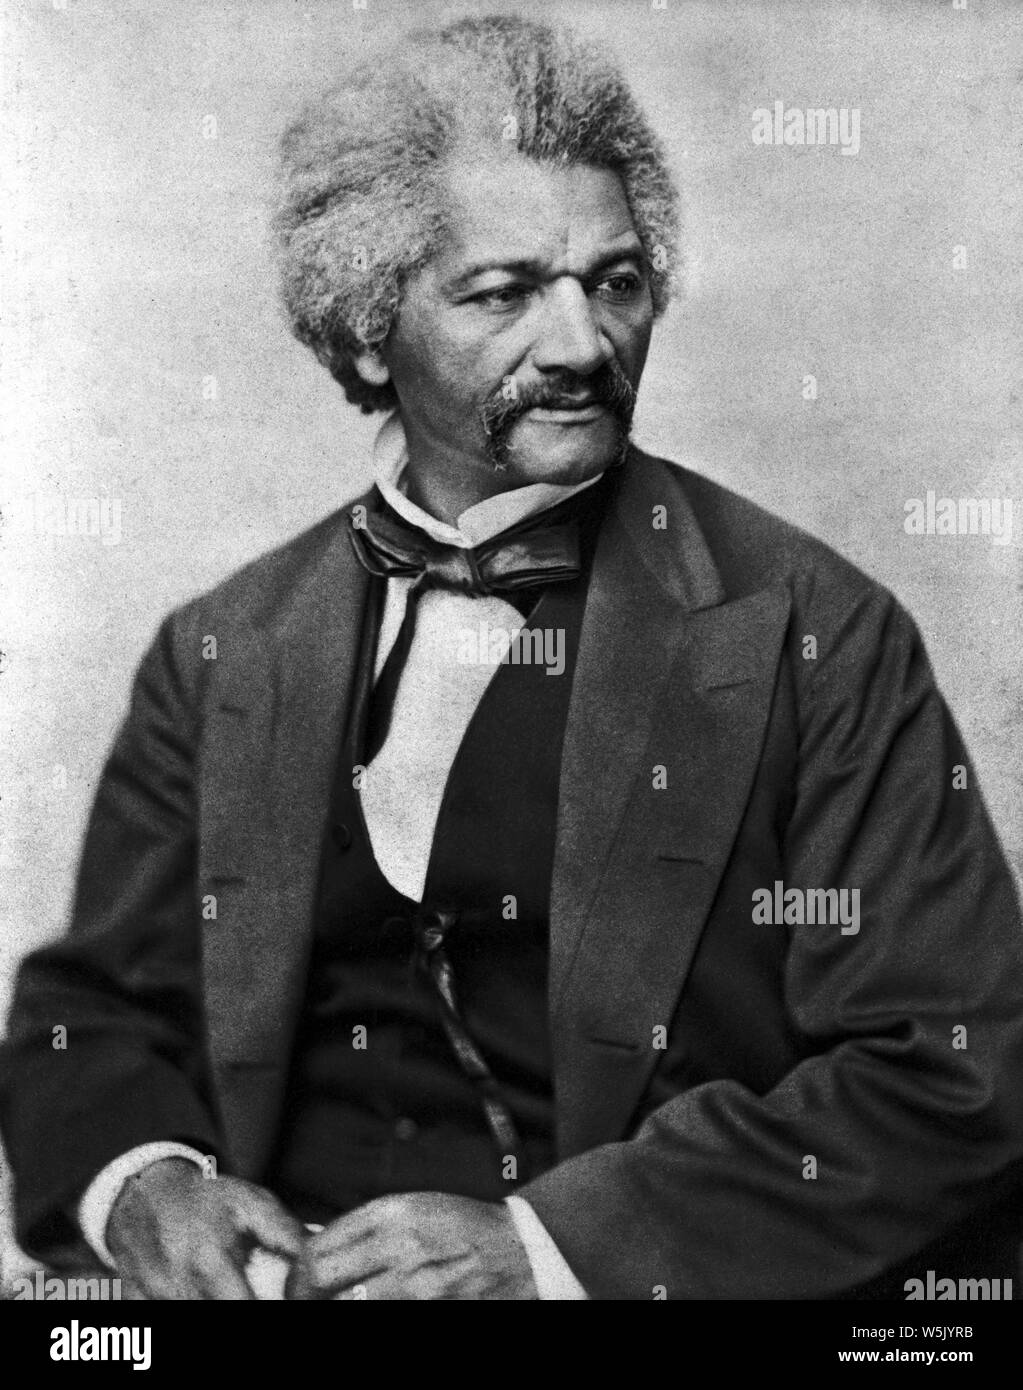 Frederick Douglass (1818-95), American Social Reformer, Abolitionist and Statesman, Half-Length Portrait, Photograph by George Francis Schreiber, 1870 Stock Photo